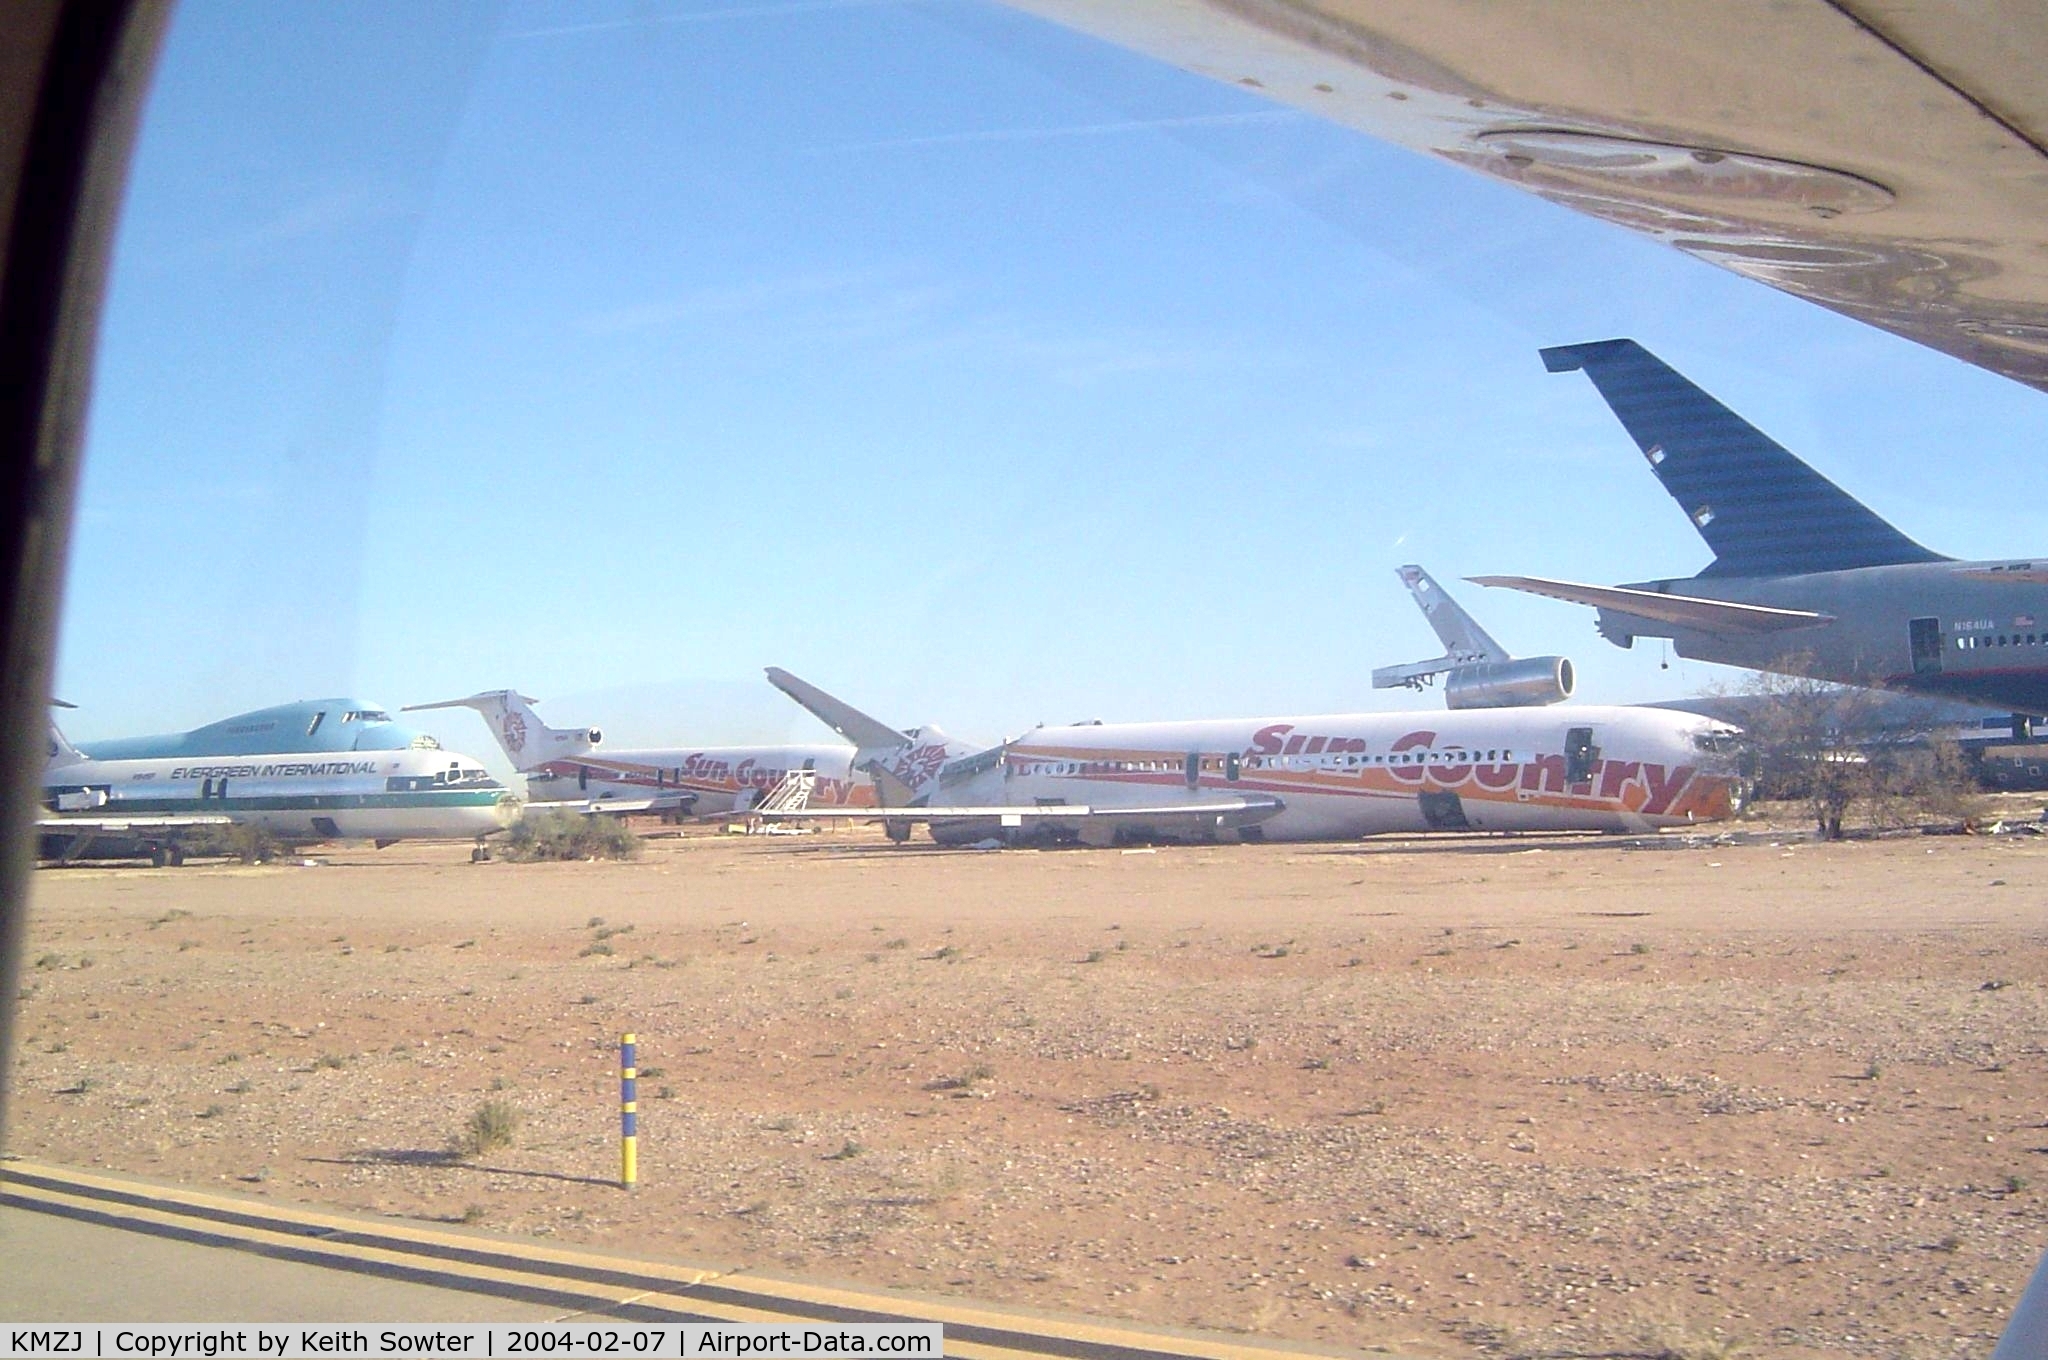 Pinal Airpark Airport (MZJ) - Image taken through perspex window of aircraft whilst overflying / taxying around 